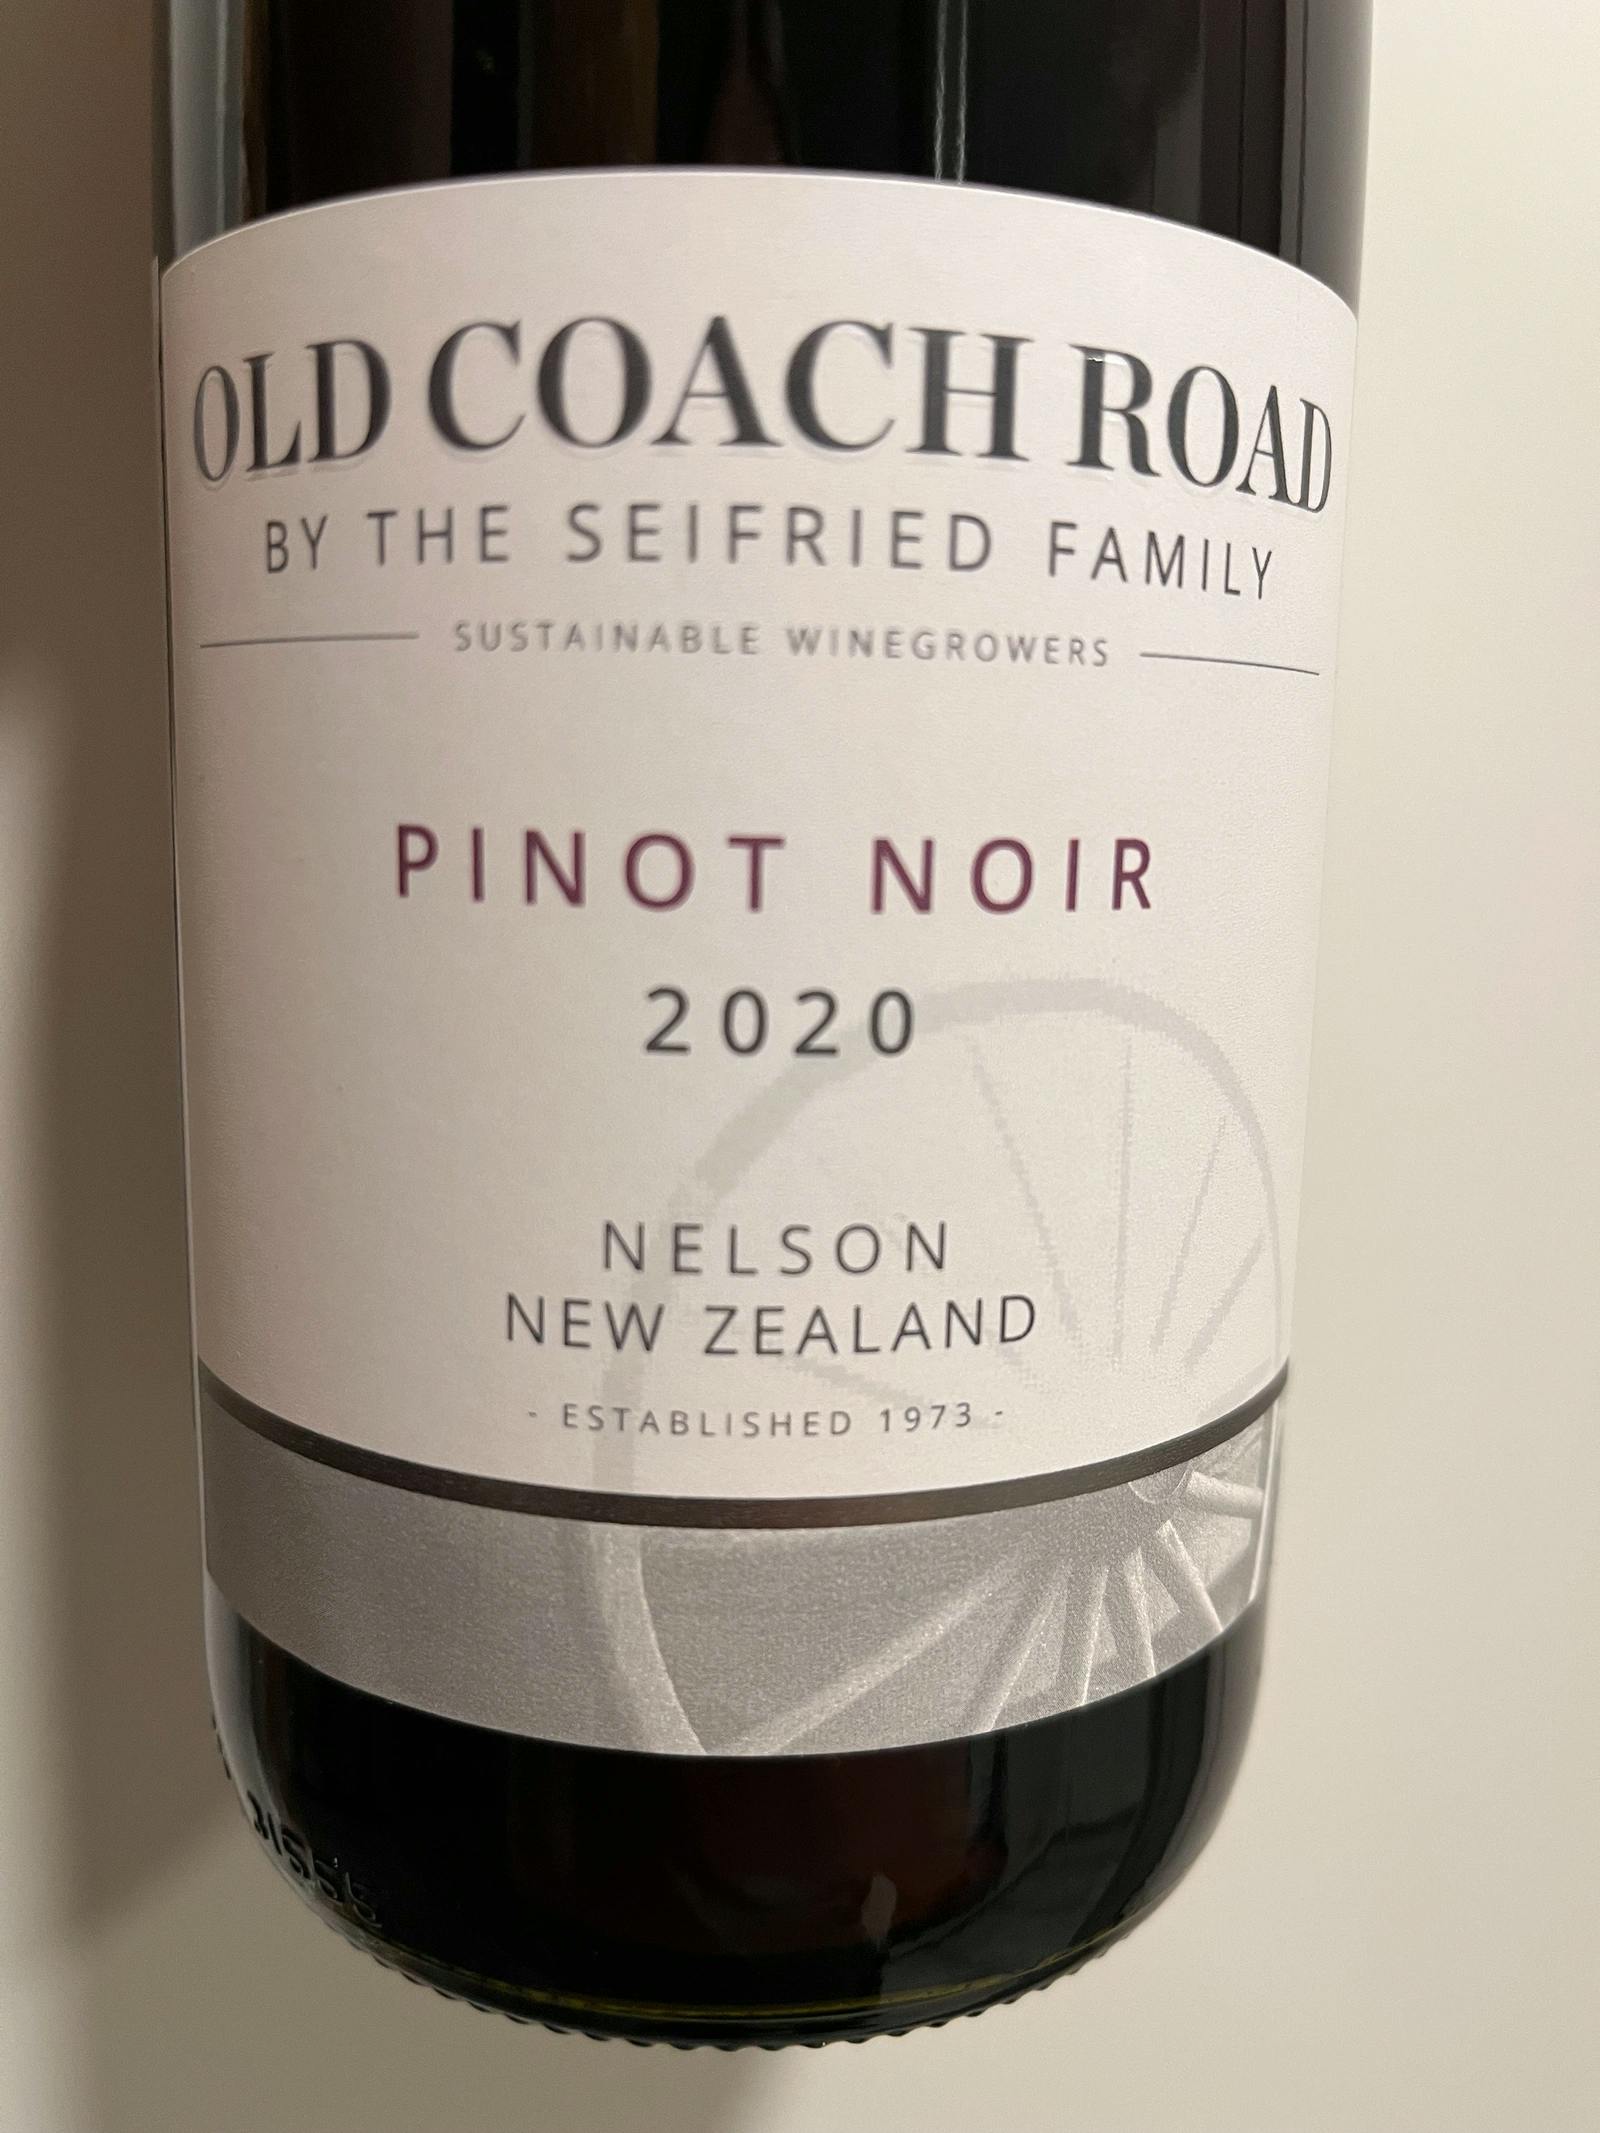 Seifried Family Old Coach Road Pinot Noir 2020